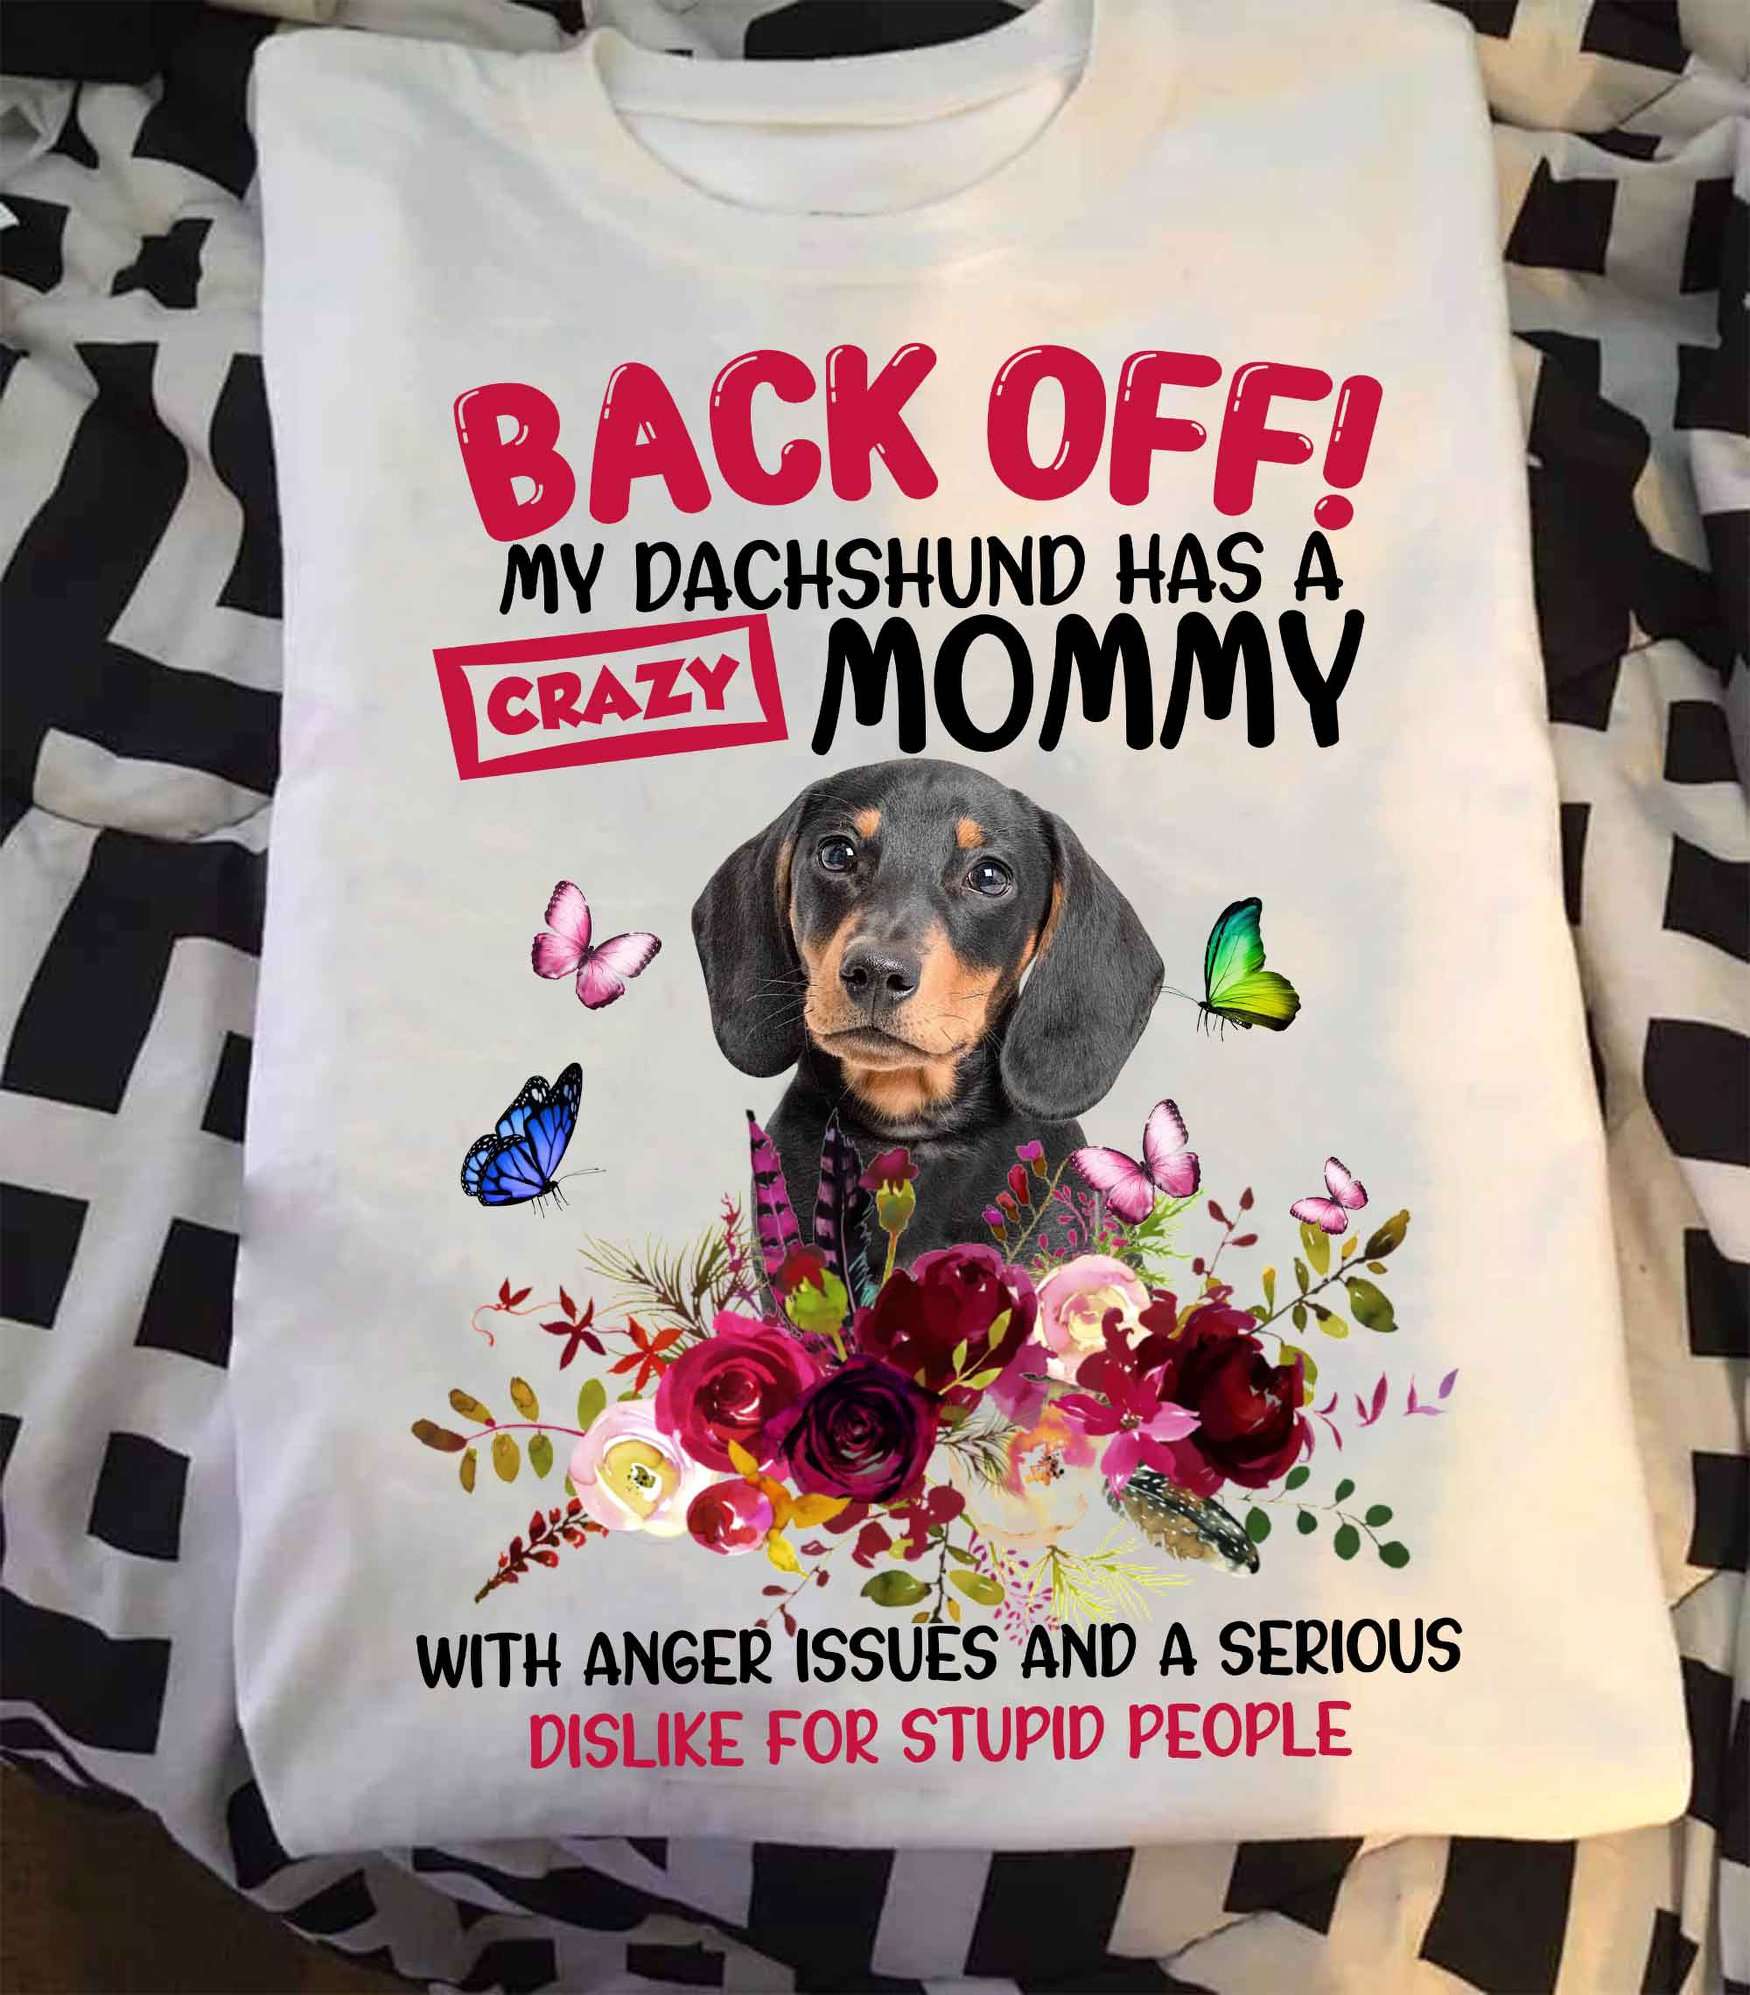 Dachshund Flower Butterfly - Back off! my dachshund has a crazy mommy with angel issues and a serious dislike for stupid people